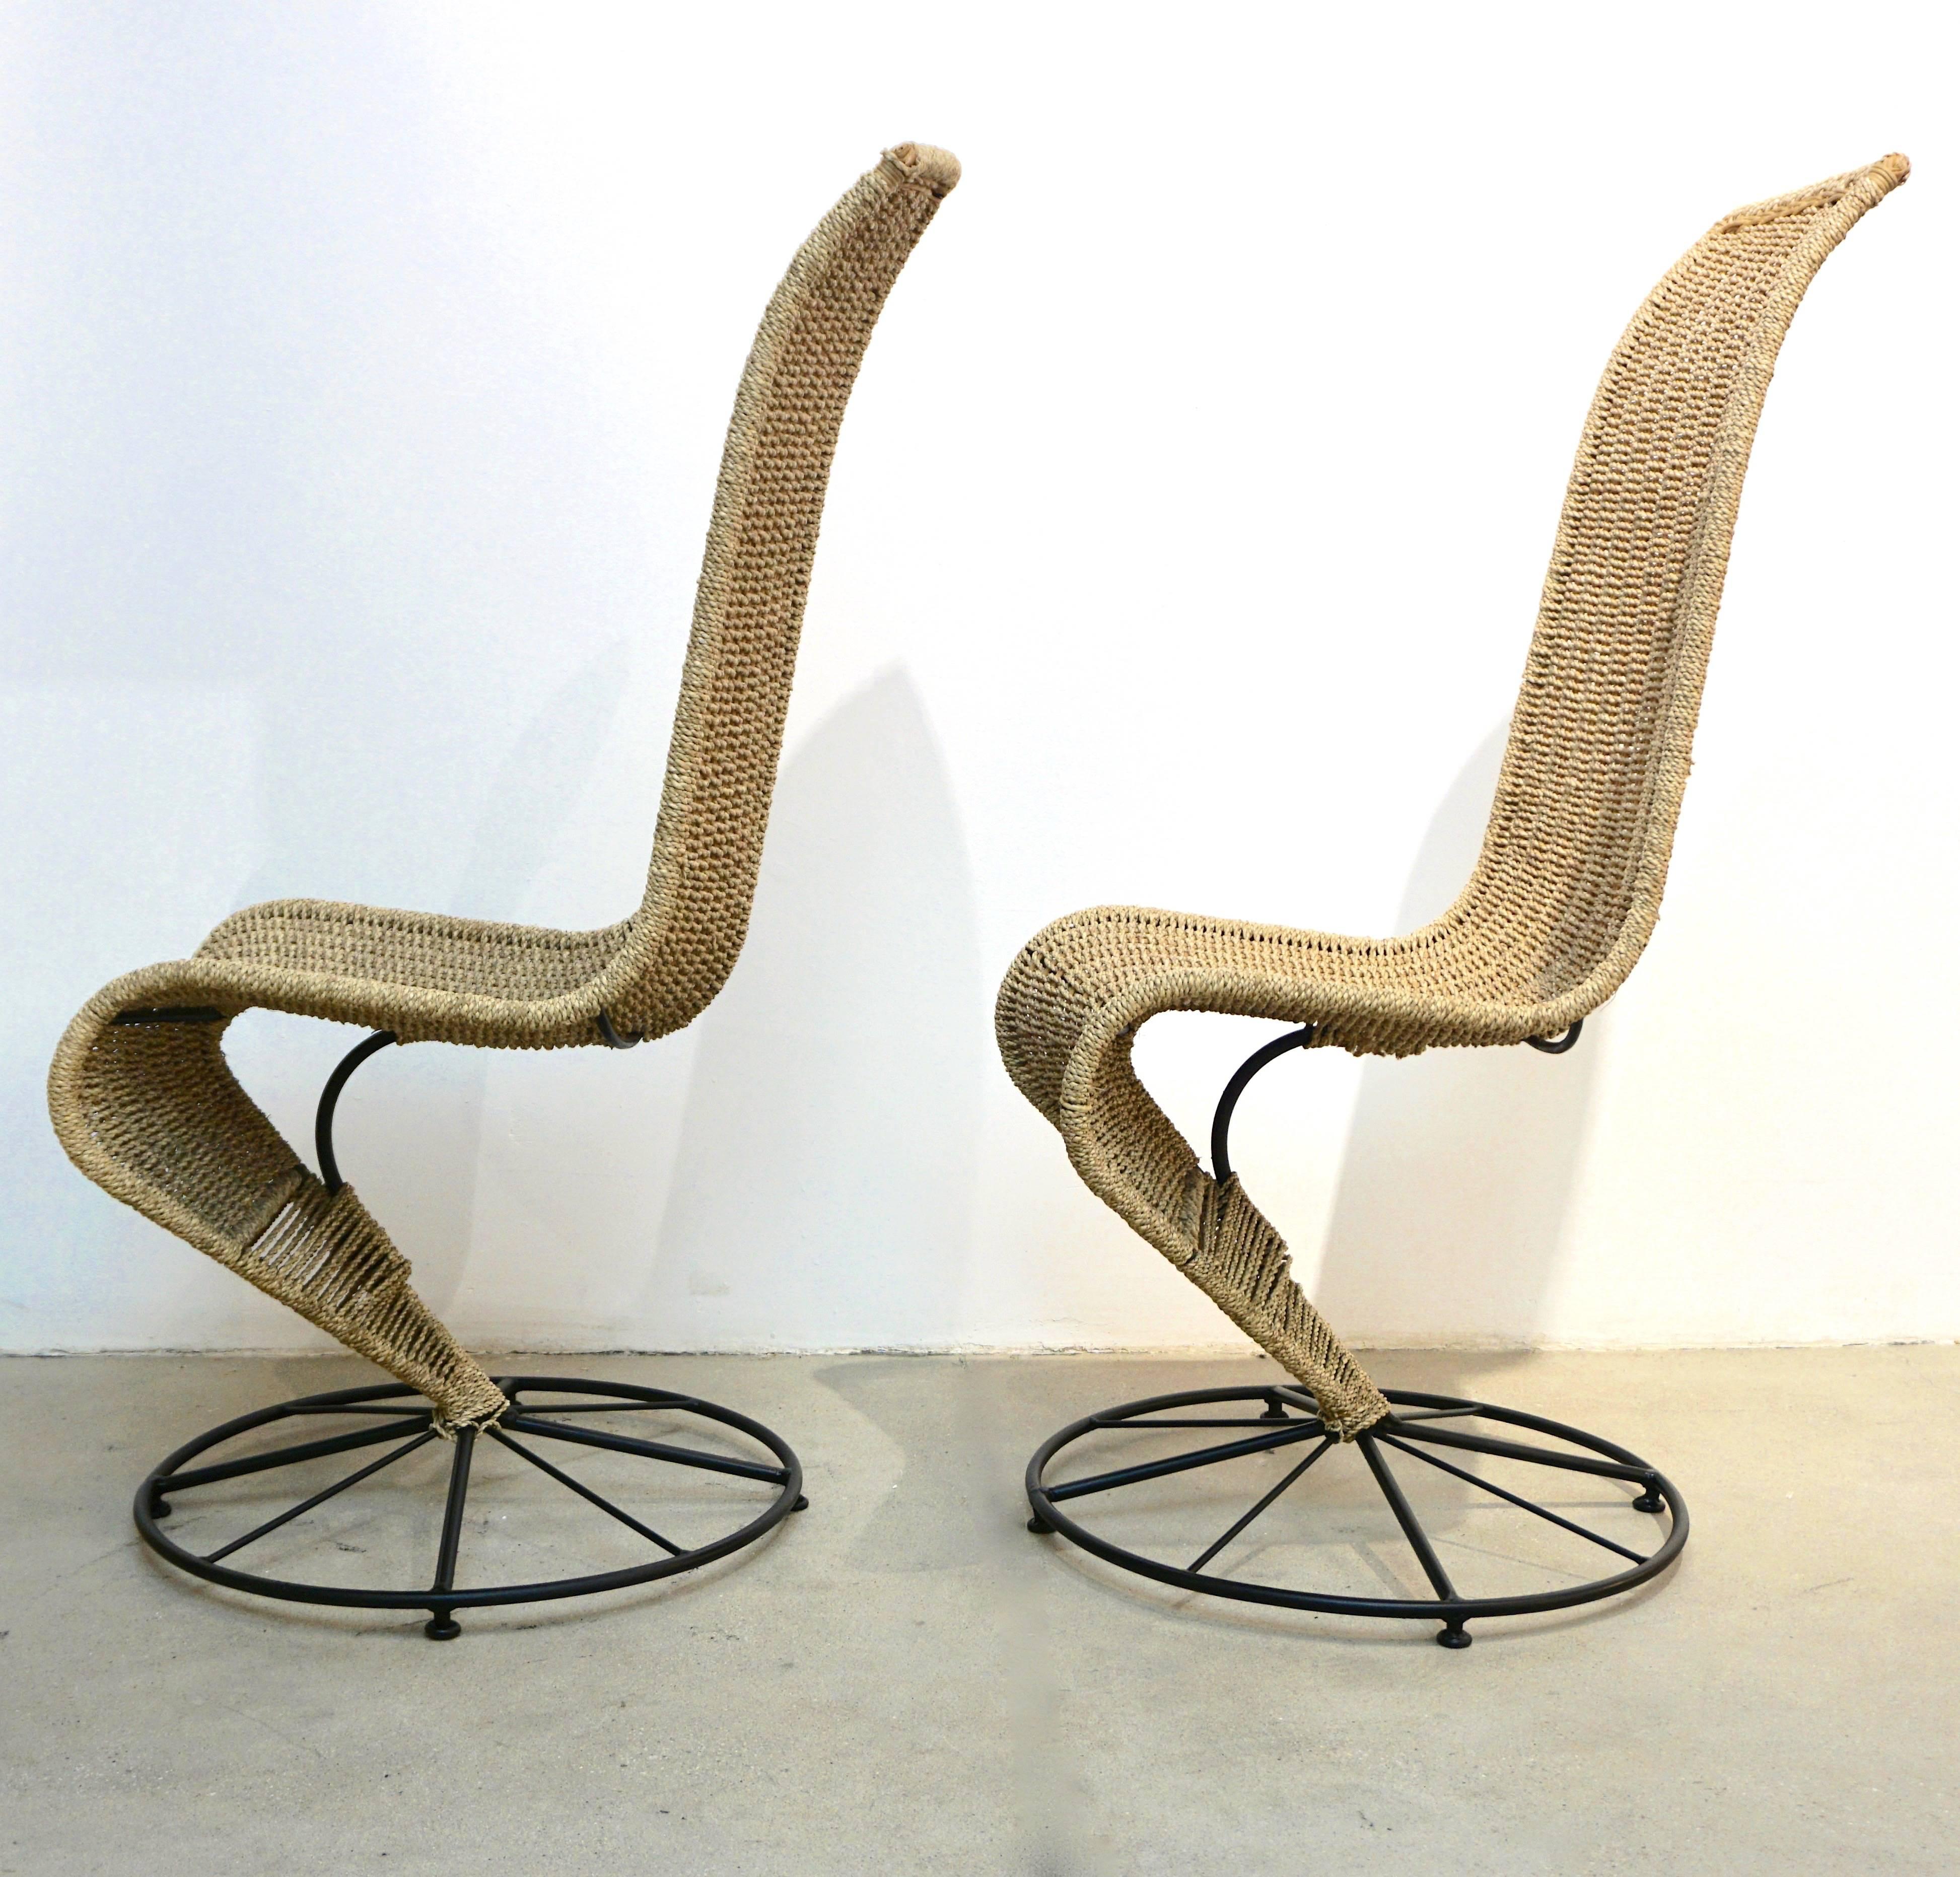 These 1970s original Italian Design pair of vintage lounge chairs are an iconic design by Marzio Cecchi for Most Firenze, entirely hand made in Italy, with black lacquered metal structure covered in beige sisal rope interwoven with wicker and raffia